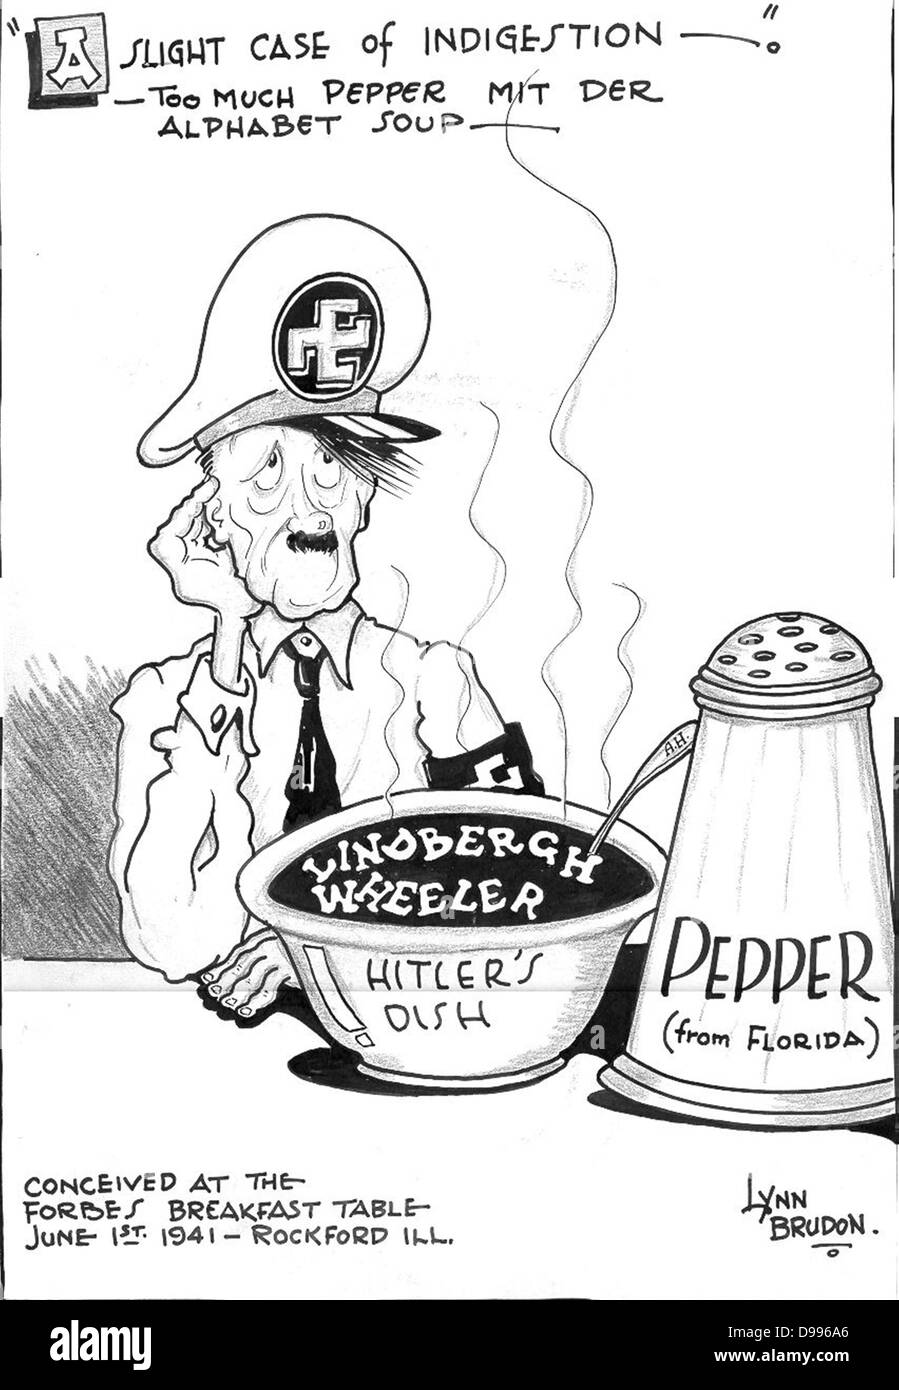 cartoon shows a very unhappy Adolf Hitler whose alphabet soup-spelling the names of Lindbergh and Wheeler-has been spoiled by 'Too much Pepper,' Senator Claude Pepper from Florida.  (Pepper, 'Diary,' May 31-June 1, 1941).  Several days later, on June 4, 1941, Claude Pepper delivered another speech Stock Photo